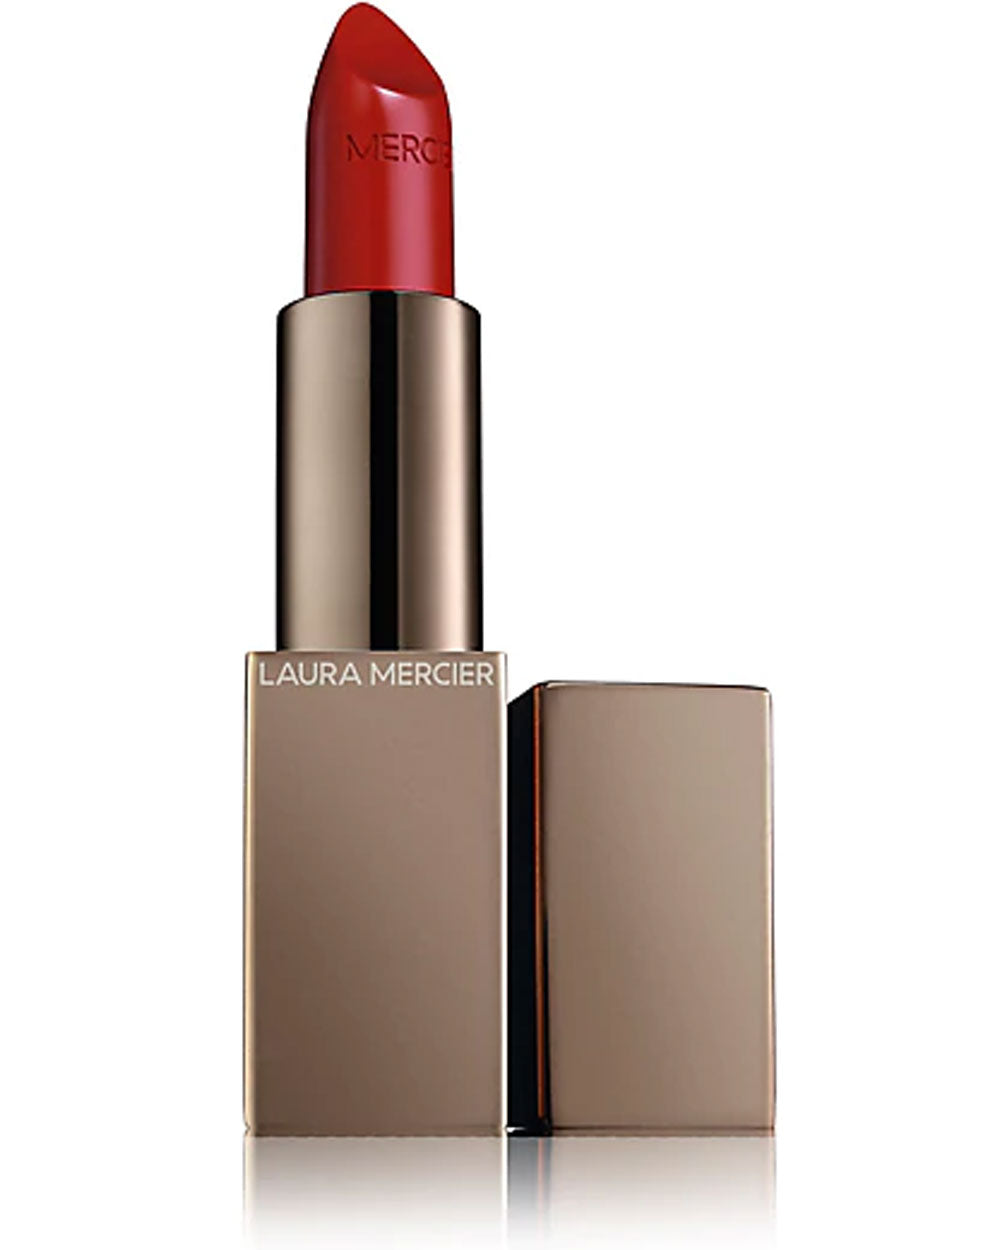 Rouge Essentiel Silky Creme Lipstick in Rouge Muse